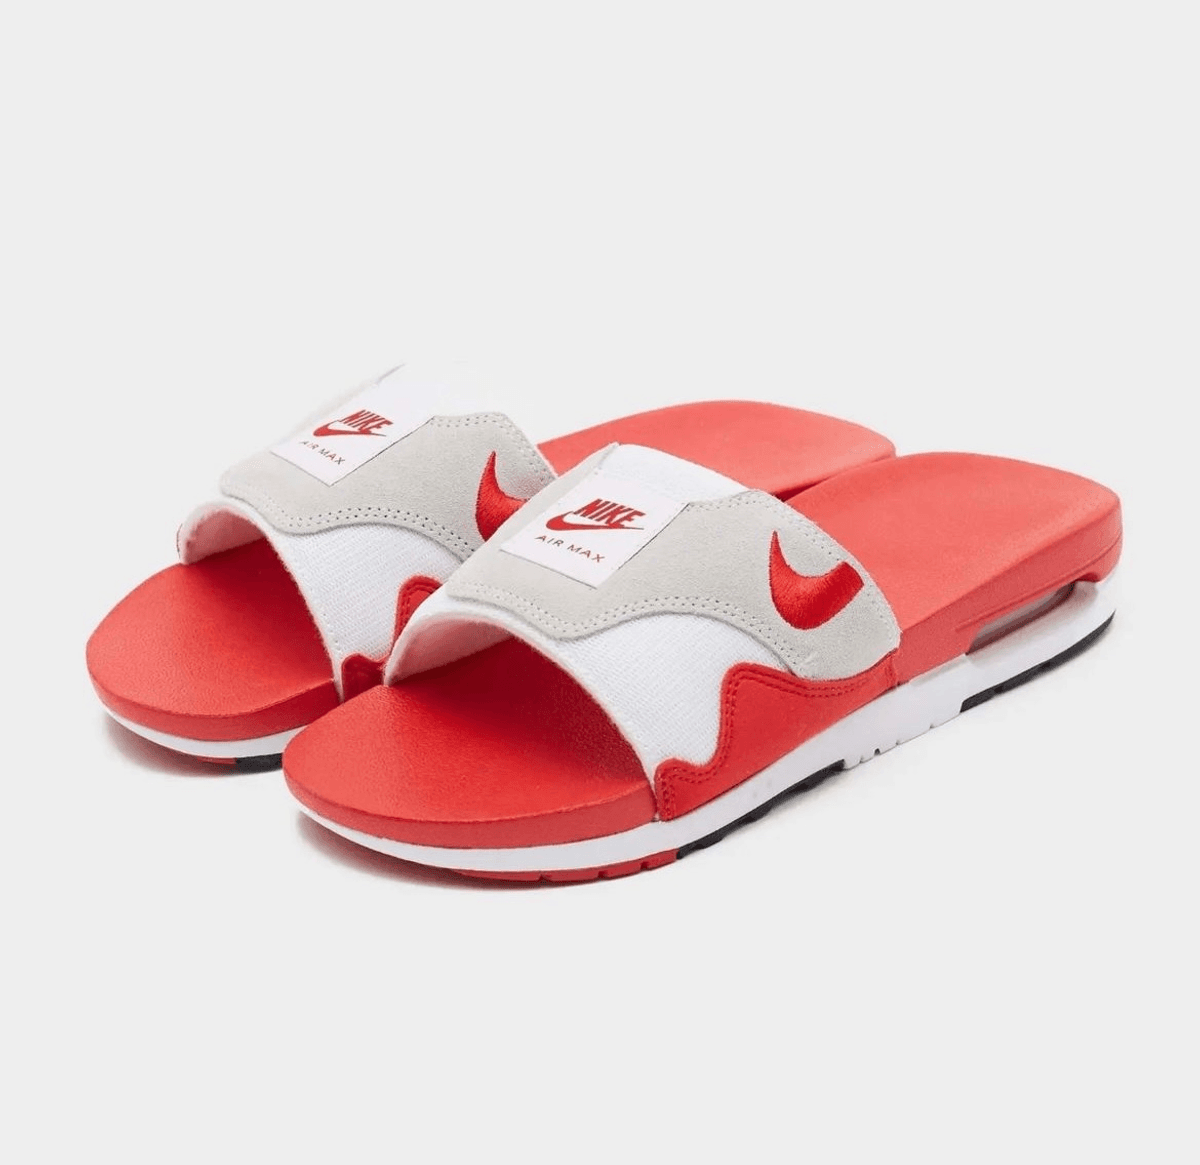 The Nike Air Max 1 Slide Is Releasing In OG Red In Honor Of Air Max Day